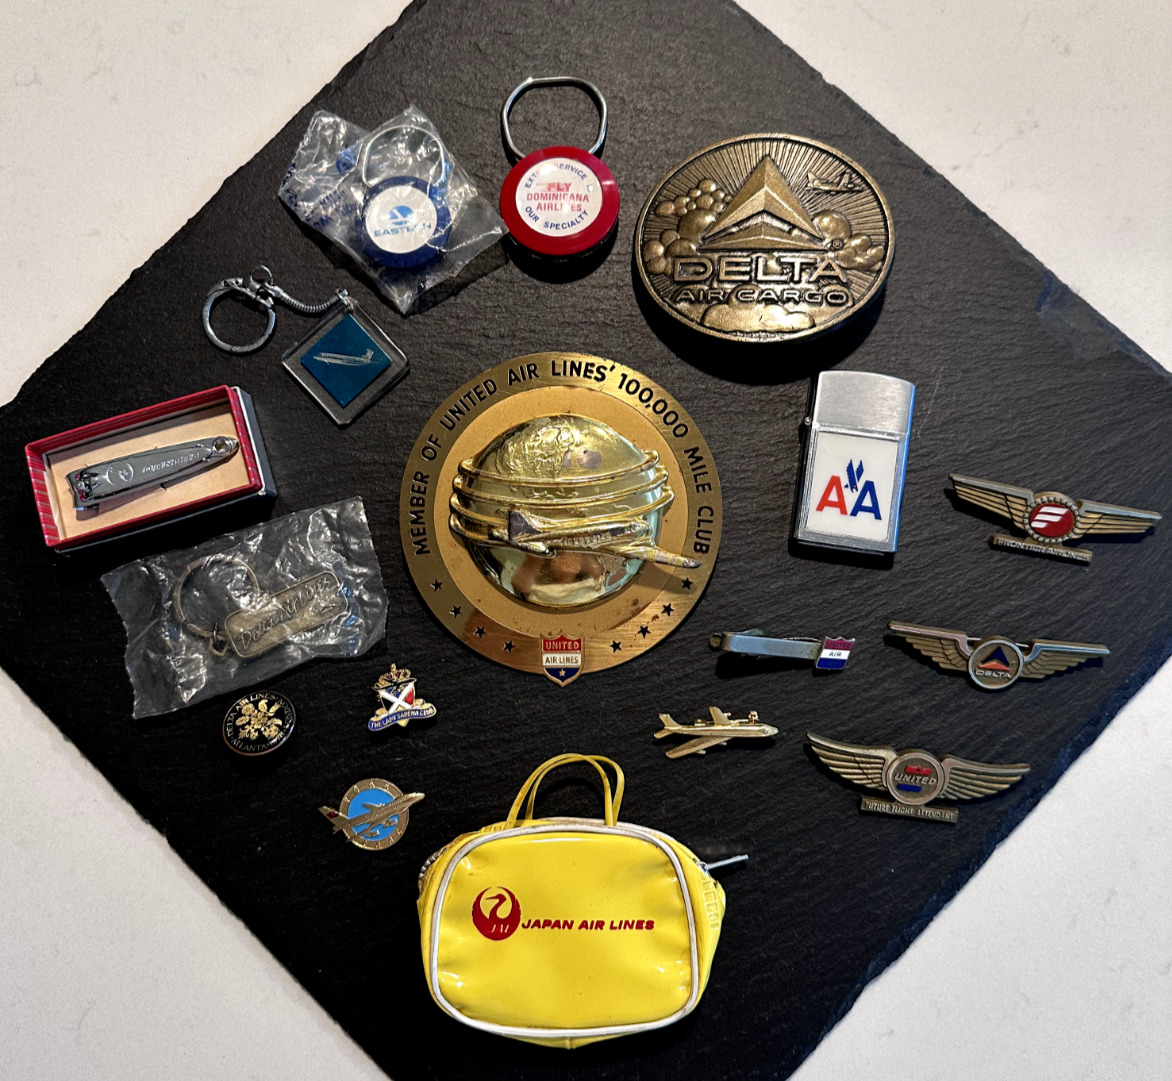 17 ASSORTED VINTAGE AIRLINE ITEMS: UNITED, JAPAN AIR LINES, QANTAS, DELTA, AA, +